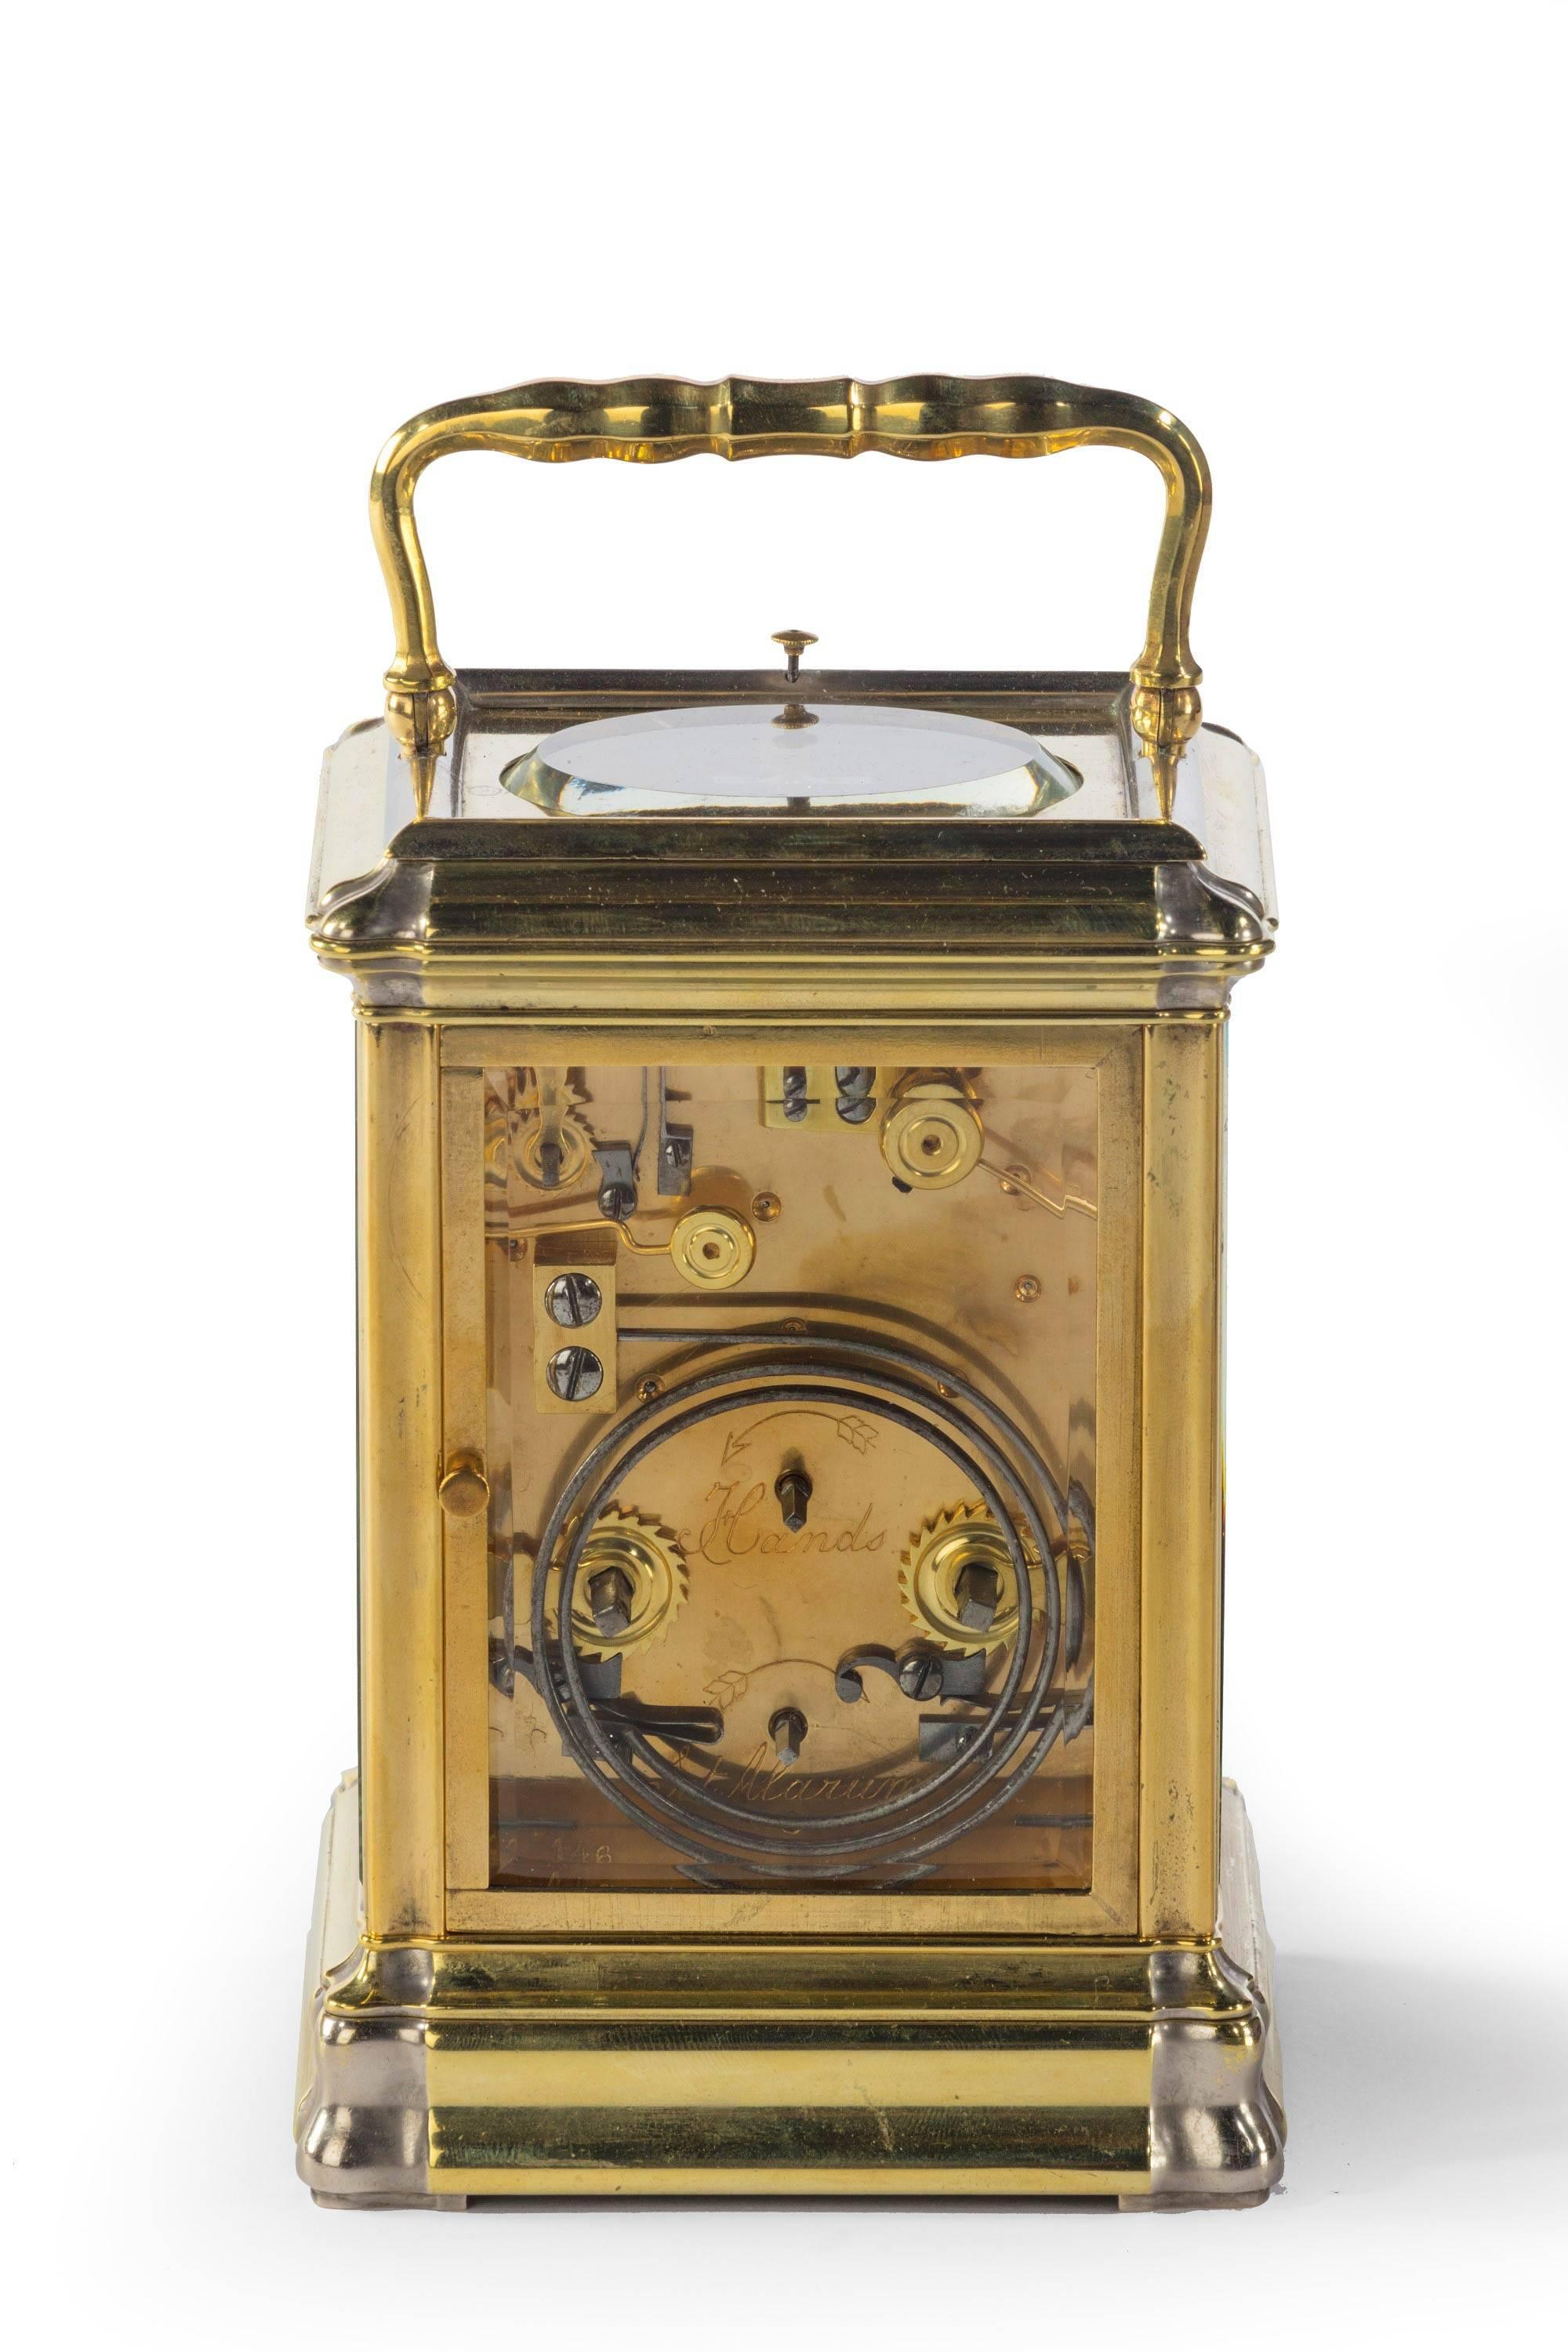 20th Century French Brass Gorge Cased Carriage Clock by Blackie, London